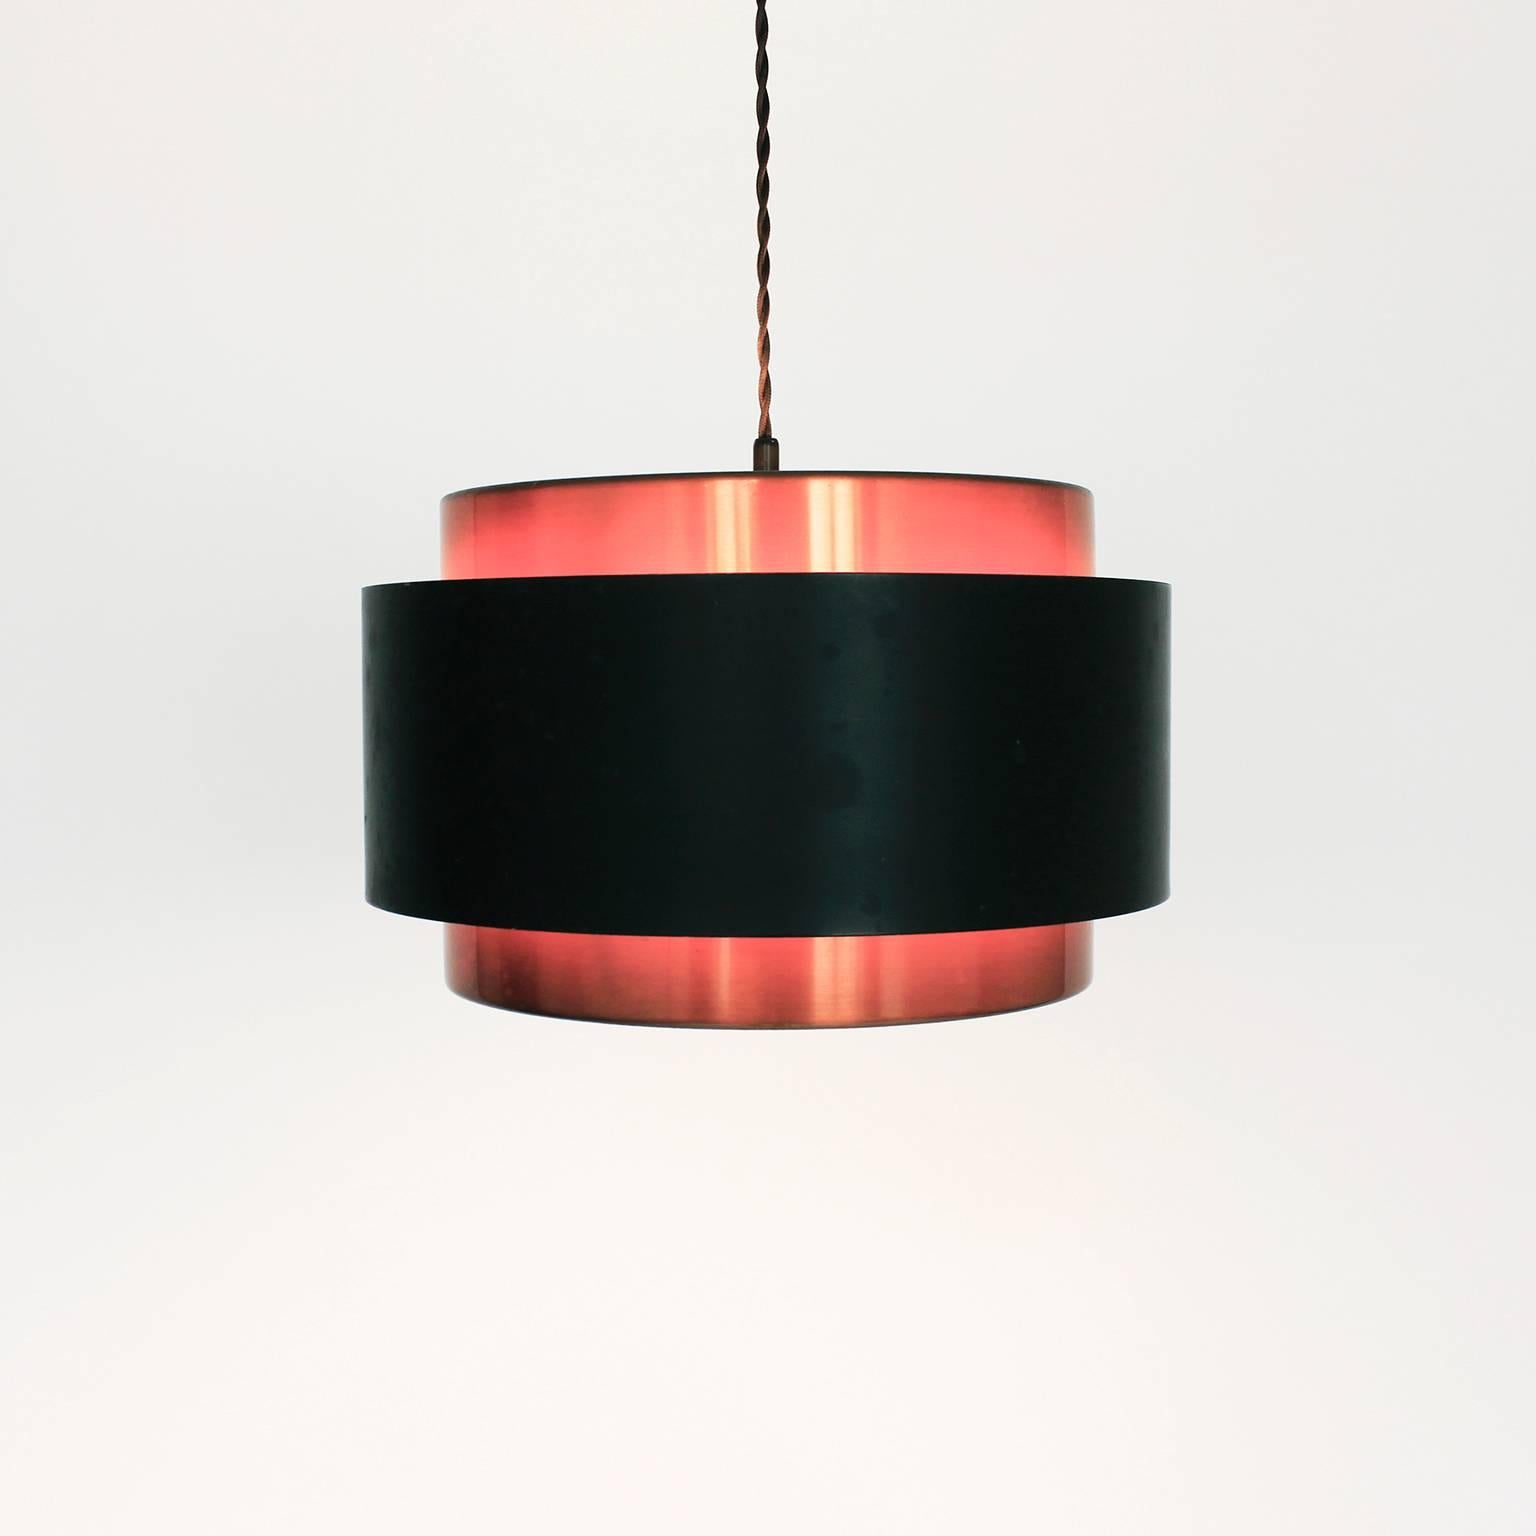 A simple yet beautiful Saturn suspension lamp in copper and black lacquered steel designed by Jo Hammerborg for Fog & Mørup. The lamp supports a single E27 bulb surrounded by two copper and one steel band (lacquered black on the outside and orange